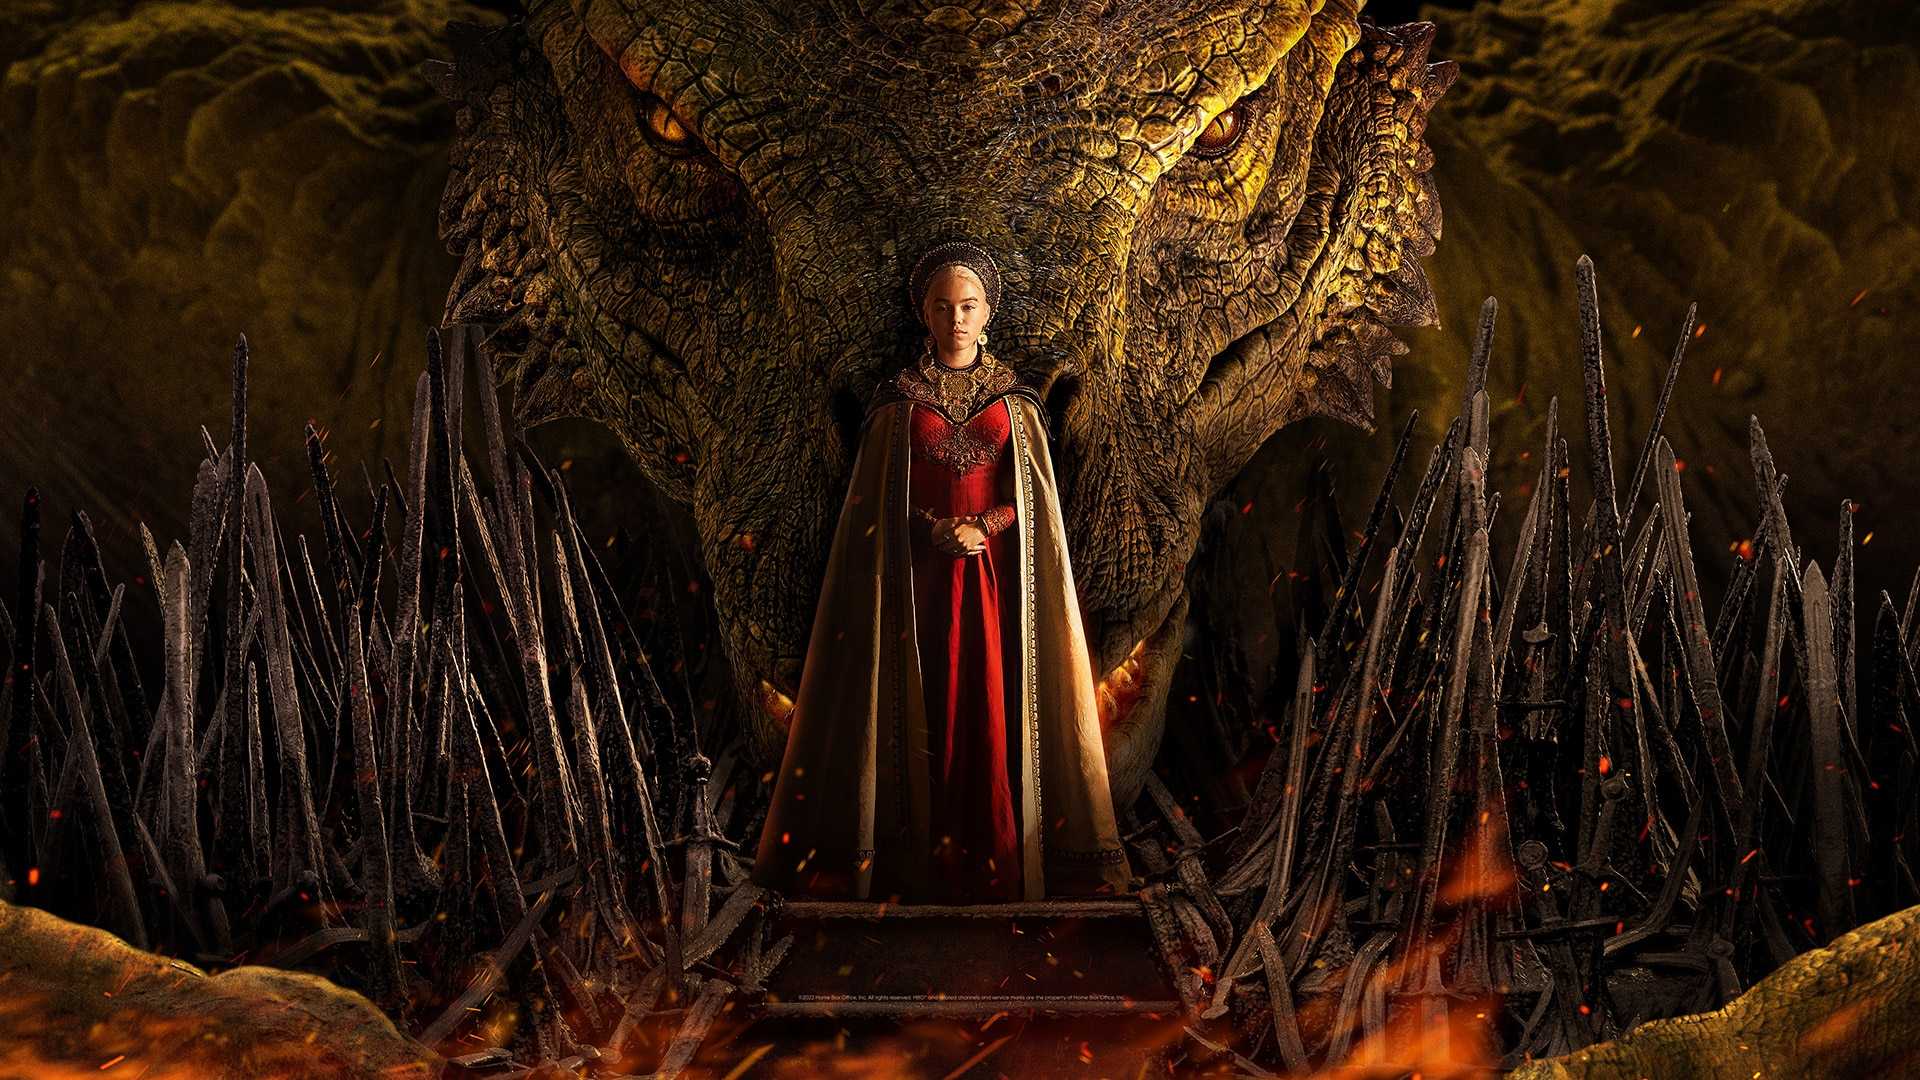 House of the Dragon first reactions are out and it looks like Game of Thrones has found a worthy successor